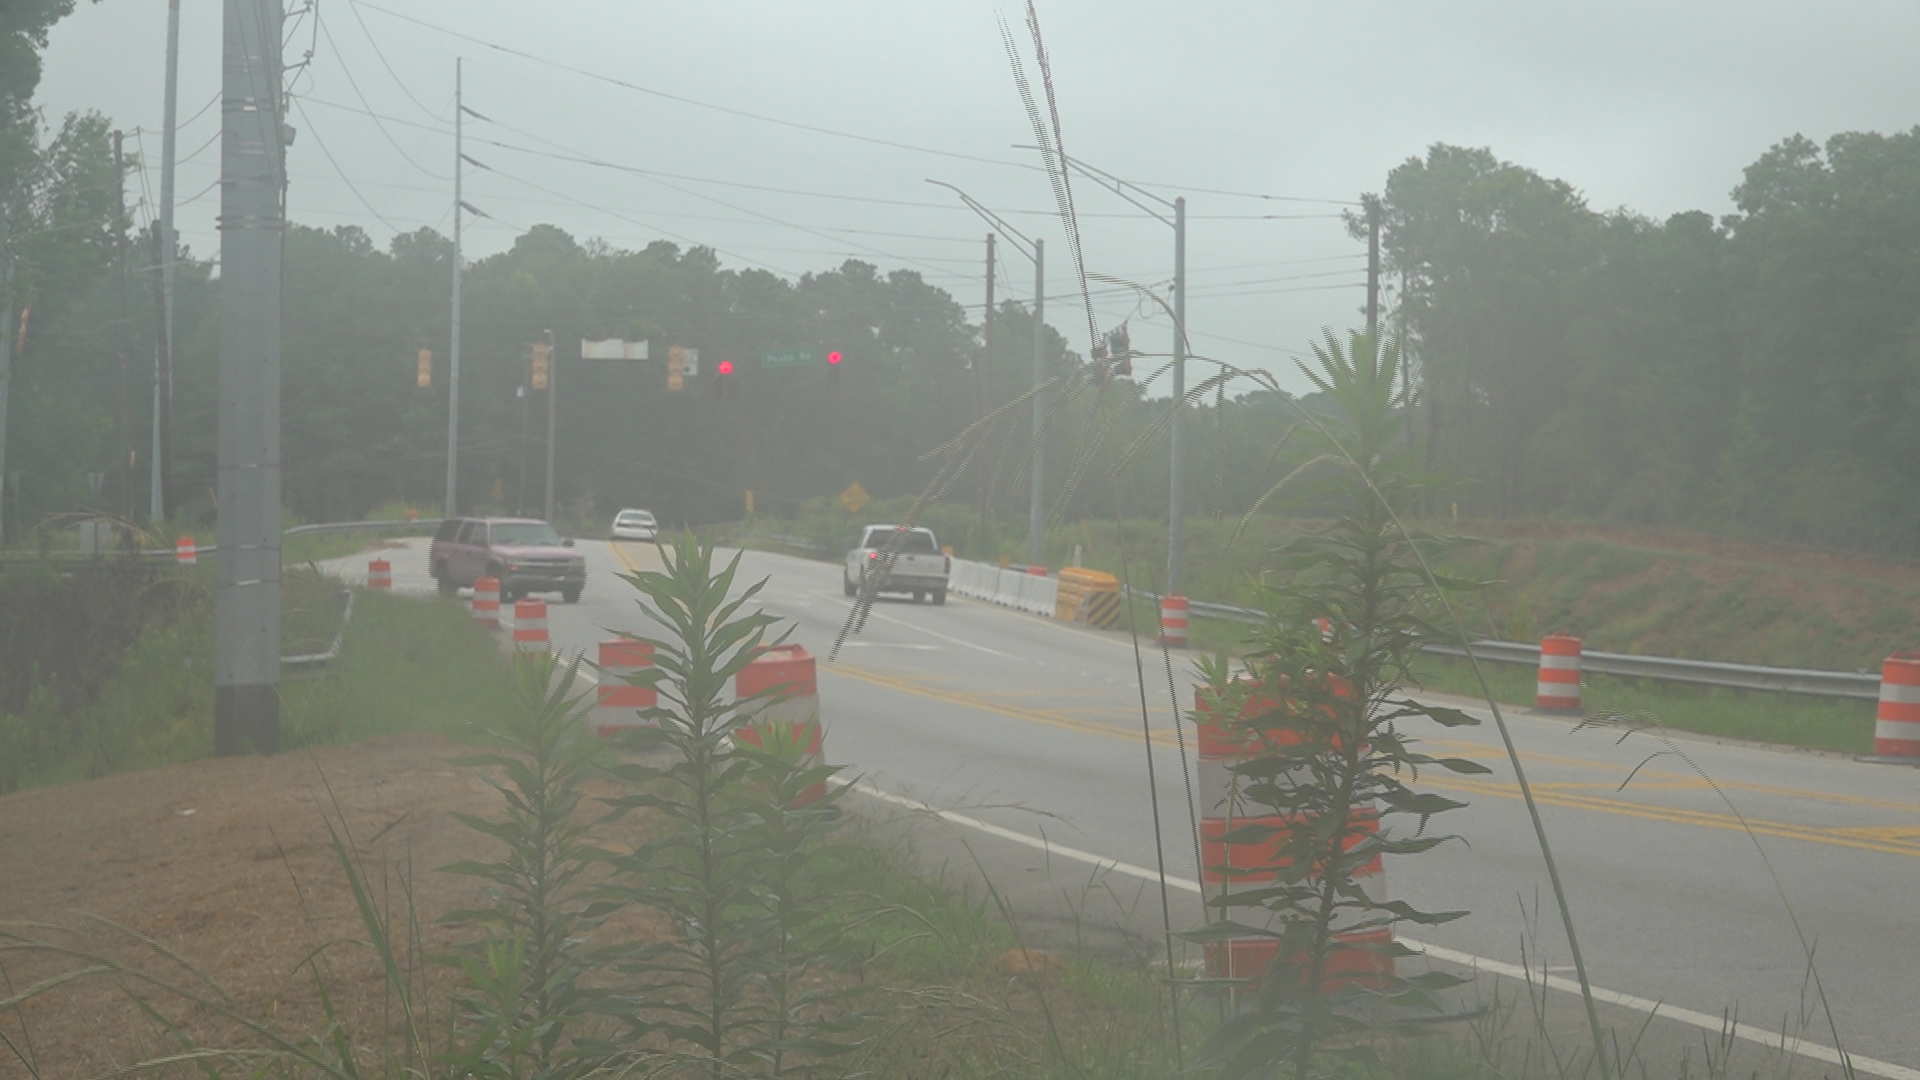 Contractors are continuing the "clearing and grubbing phase" of the road work on Tucker Road, according to the state.